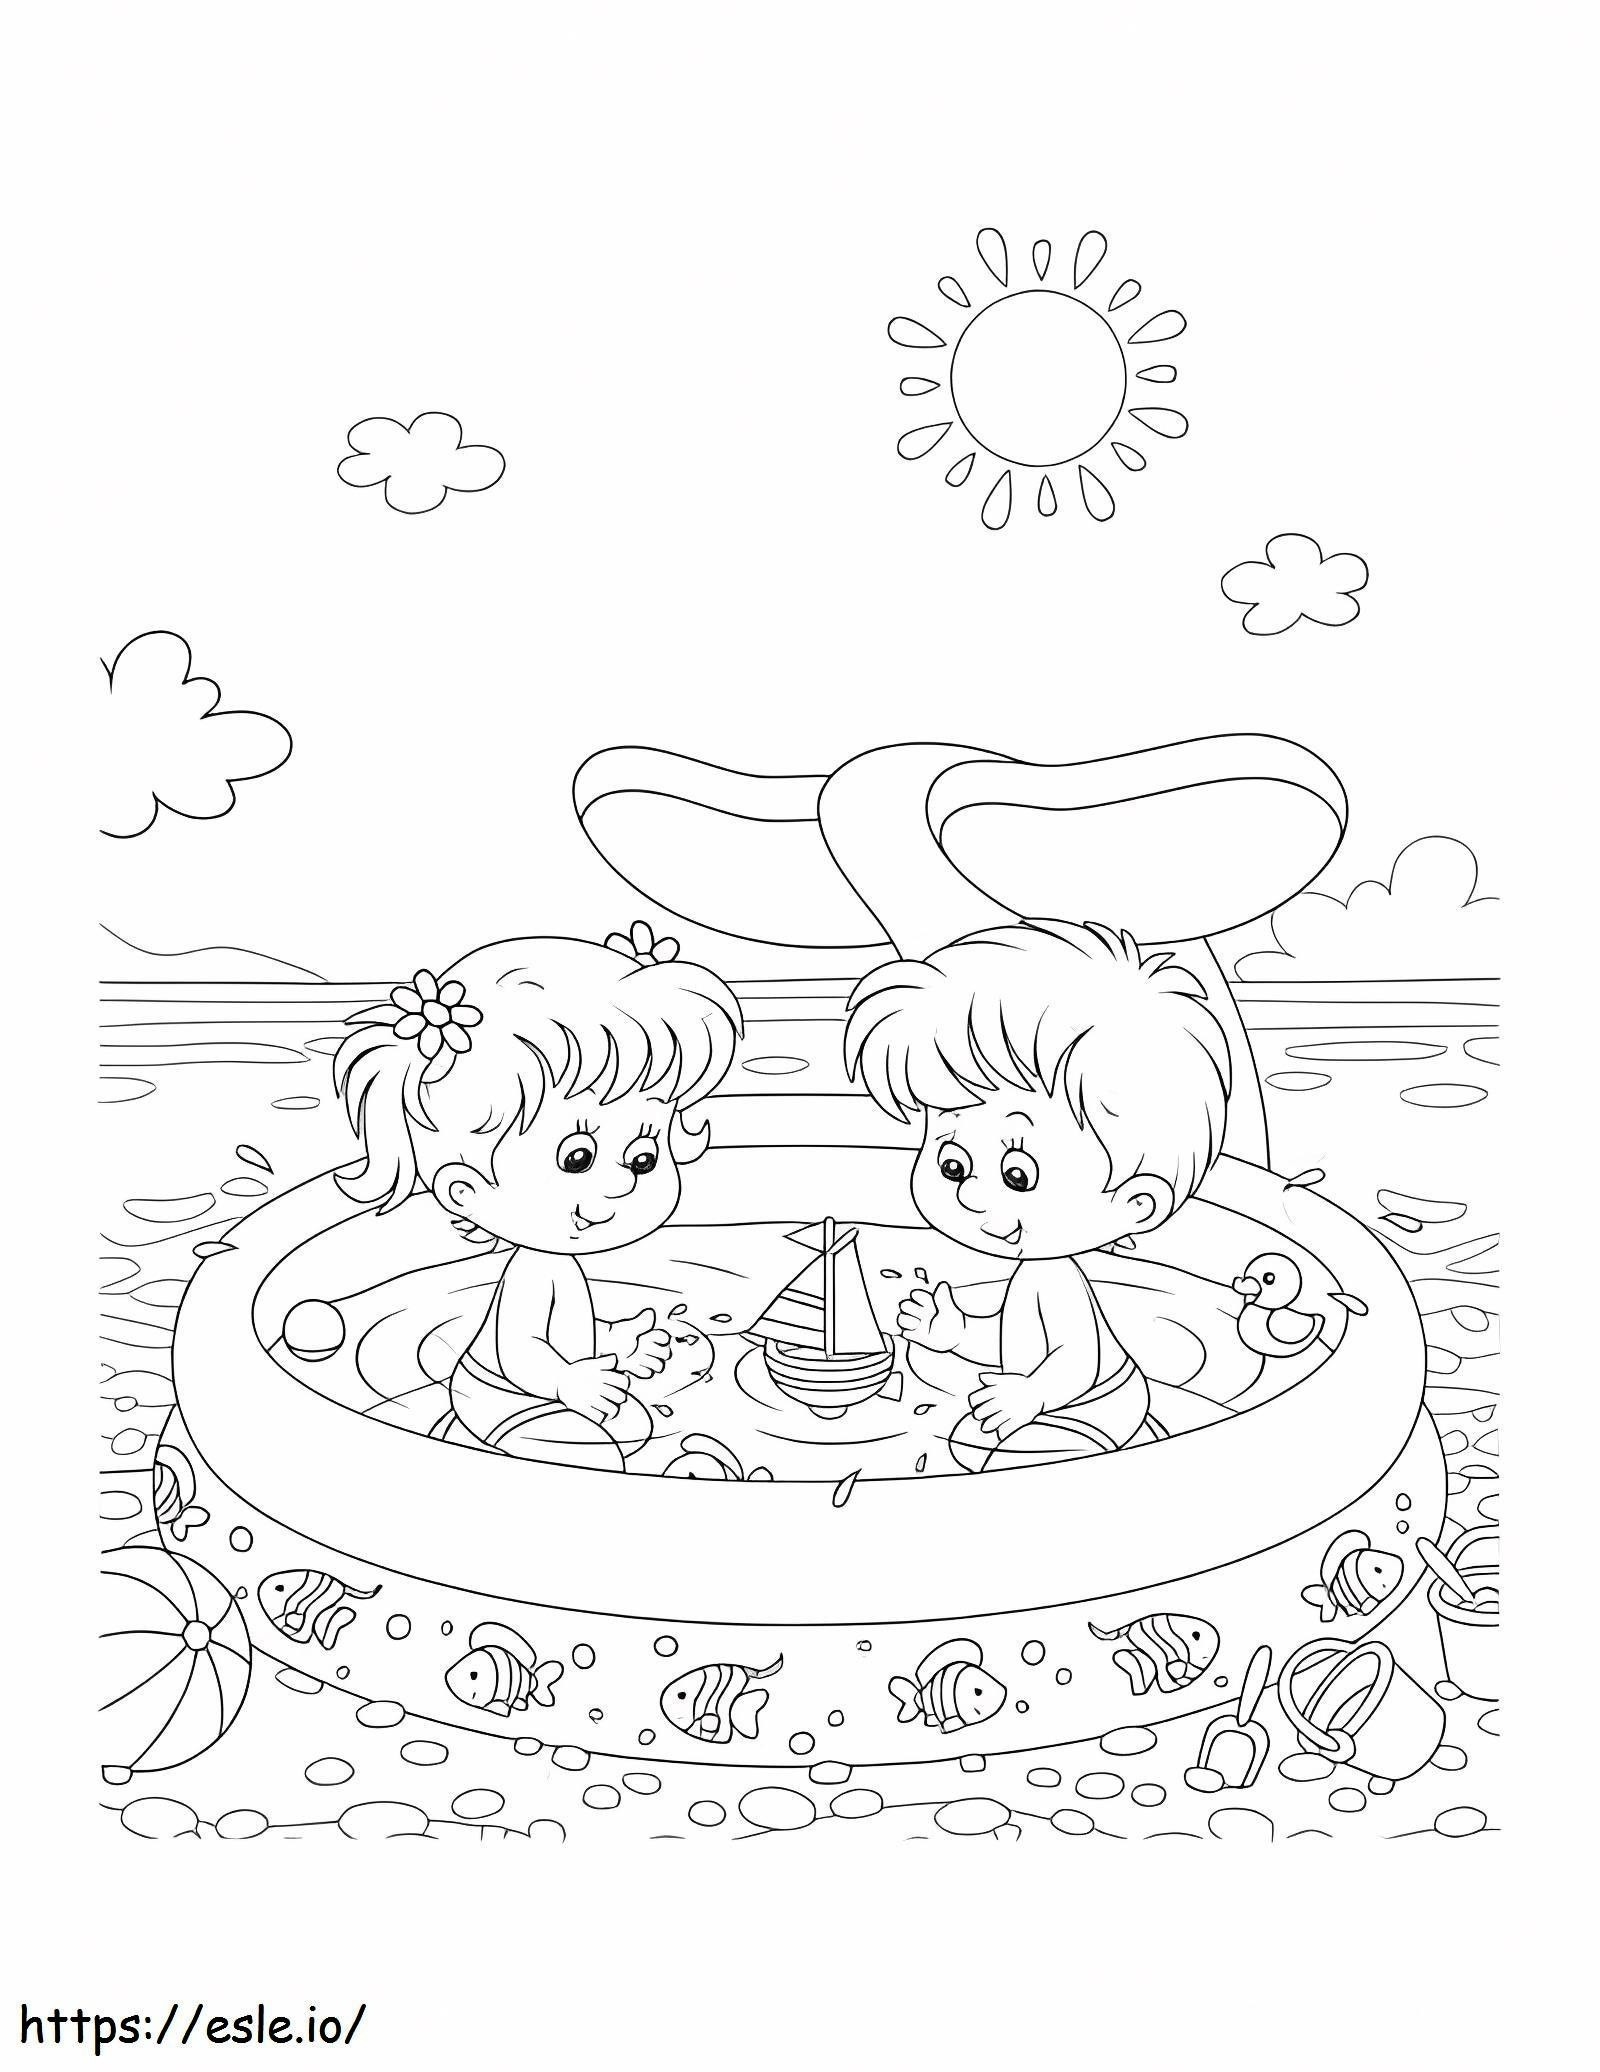 Child Boy And Girl In Swimming Pool coloring page